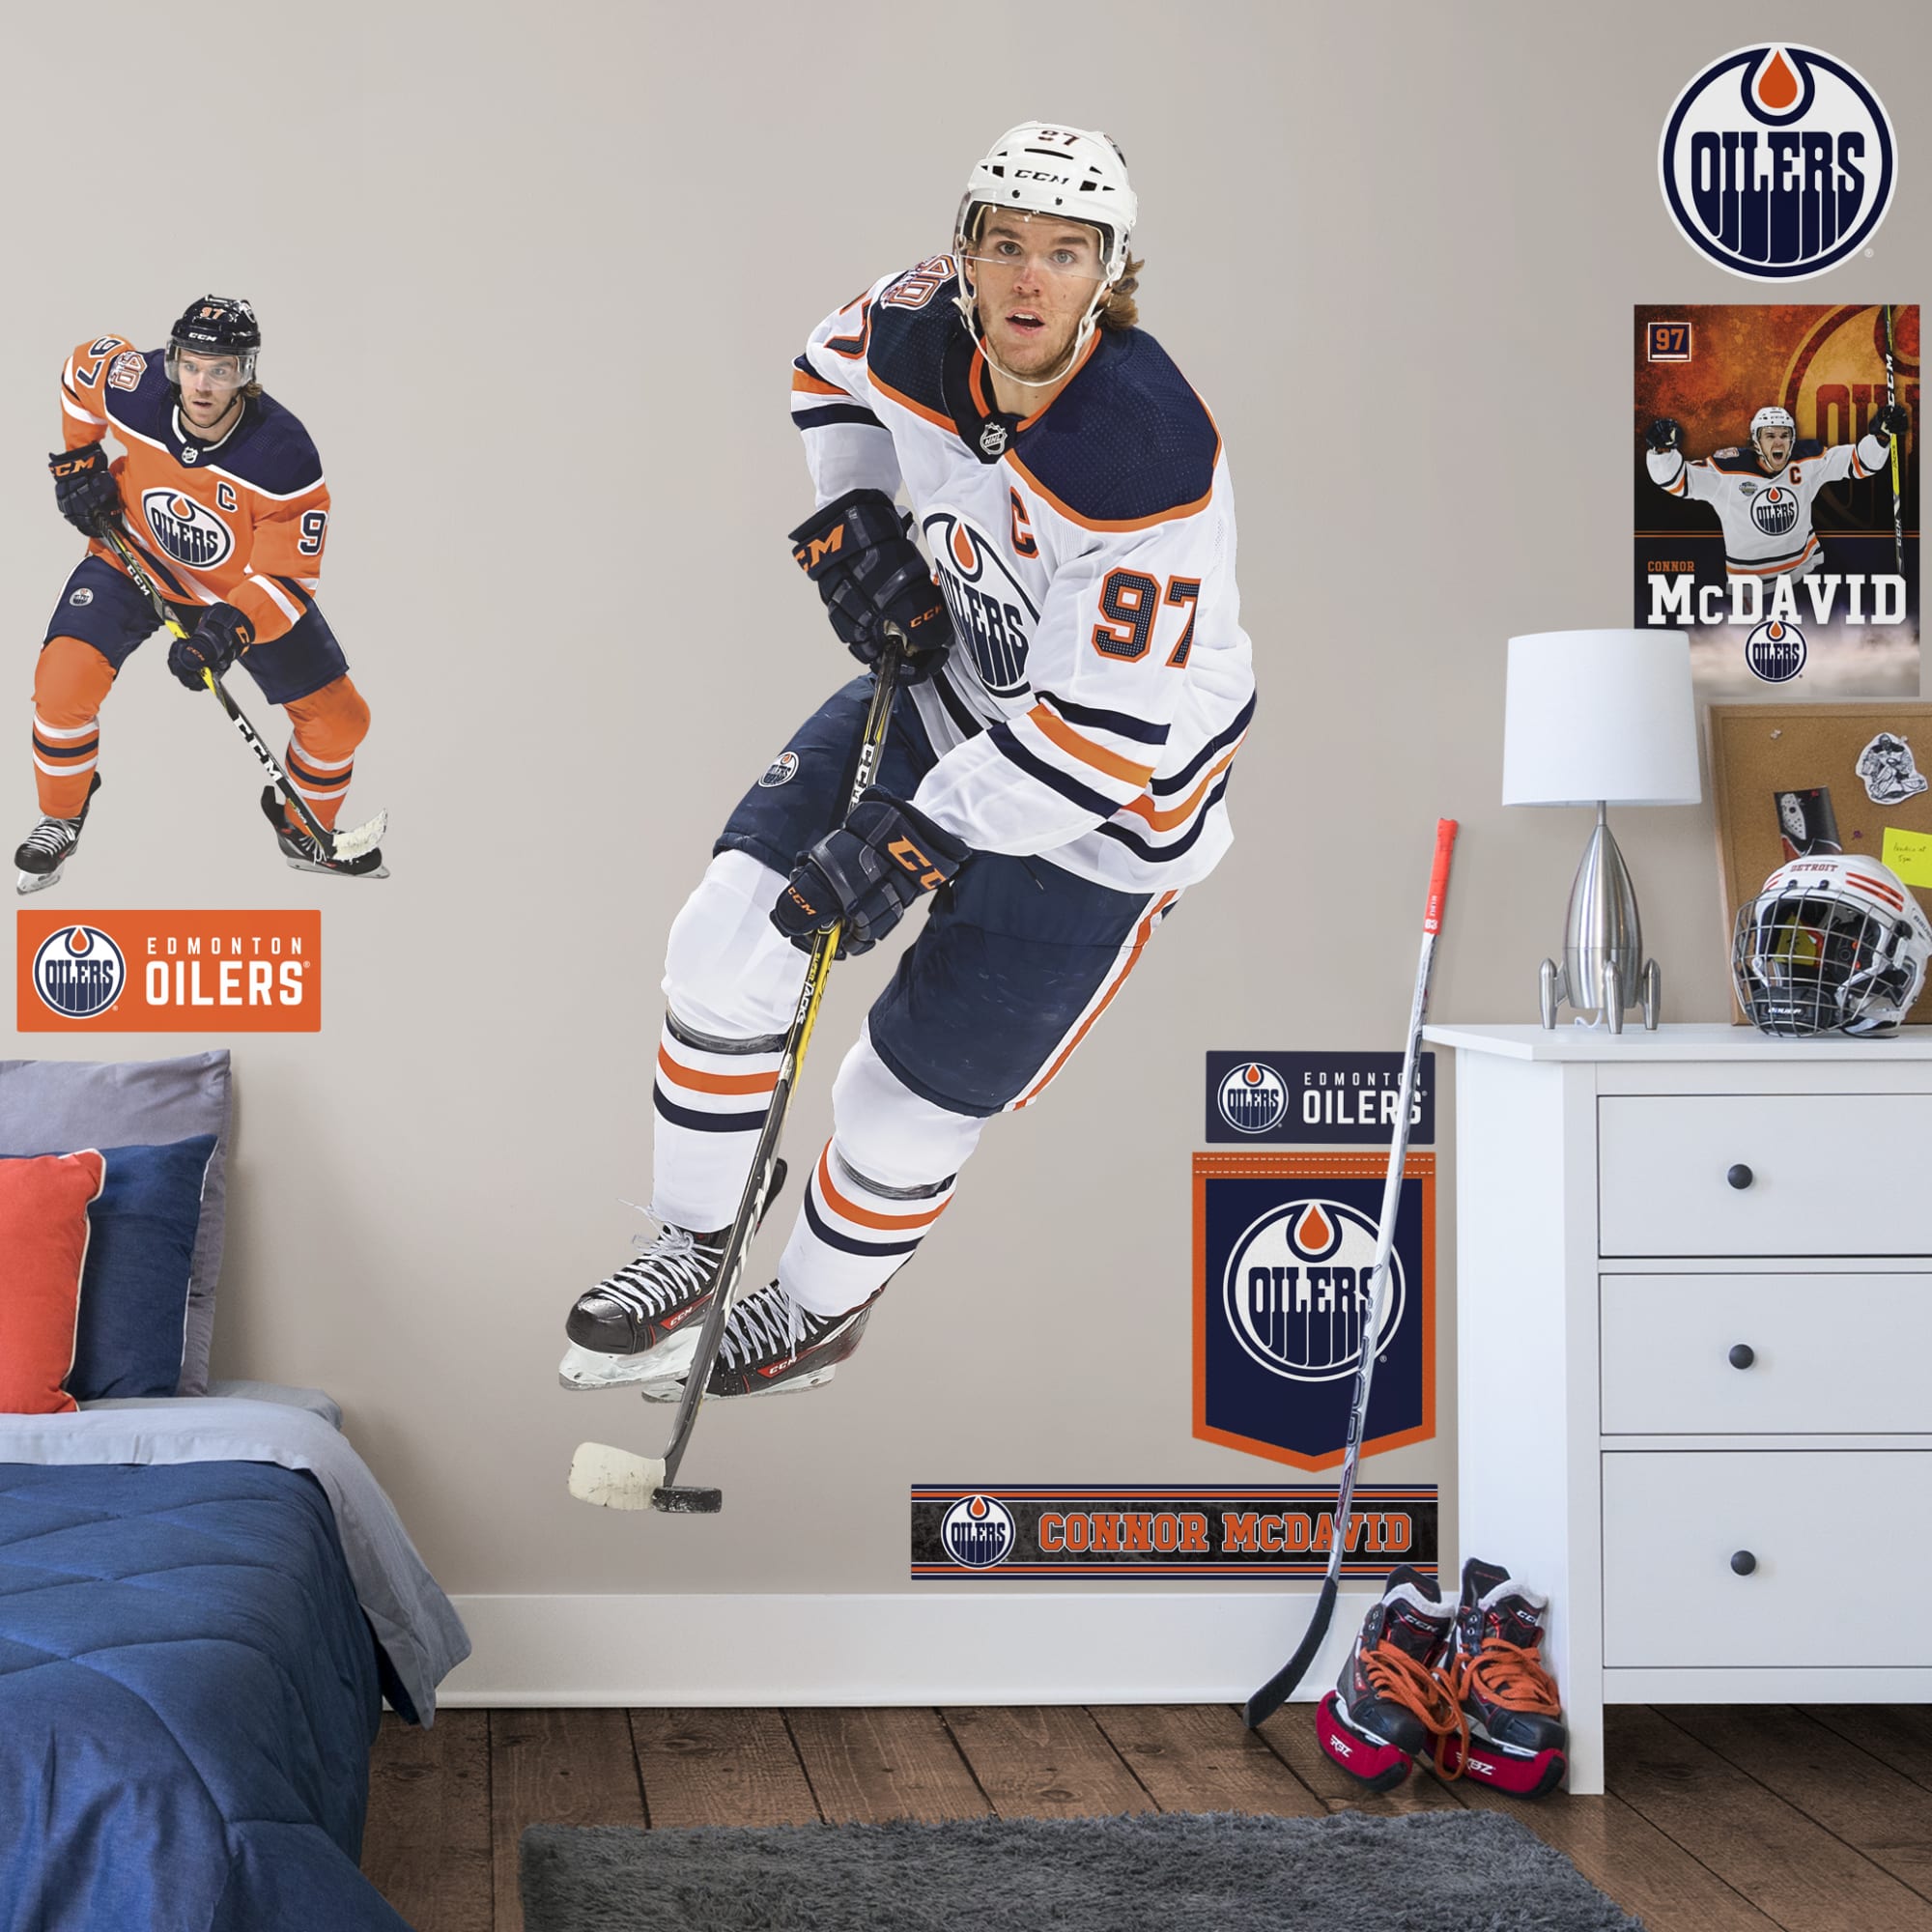 Connor McDavid for Edmonton Oilers: Away - Officially Licensed NHL Removable Wall Decal Life-Size Athlete + 8 Team Decals (39"W